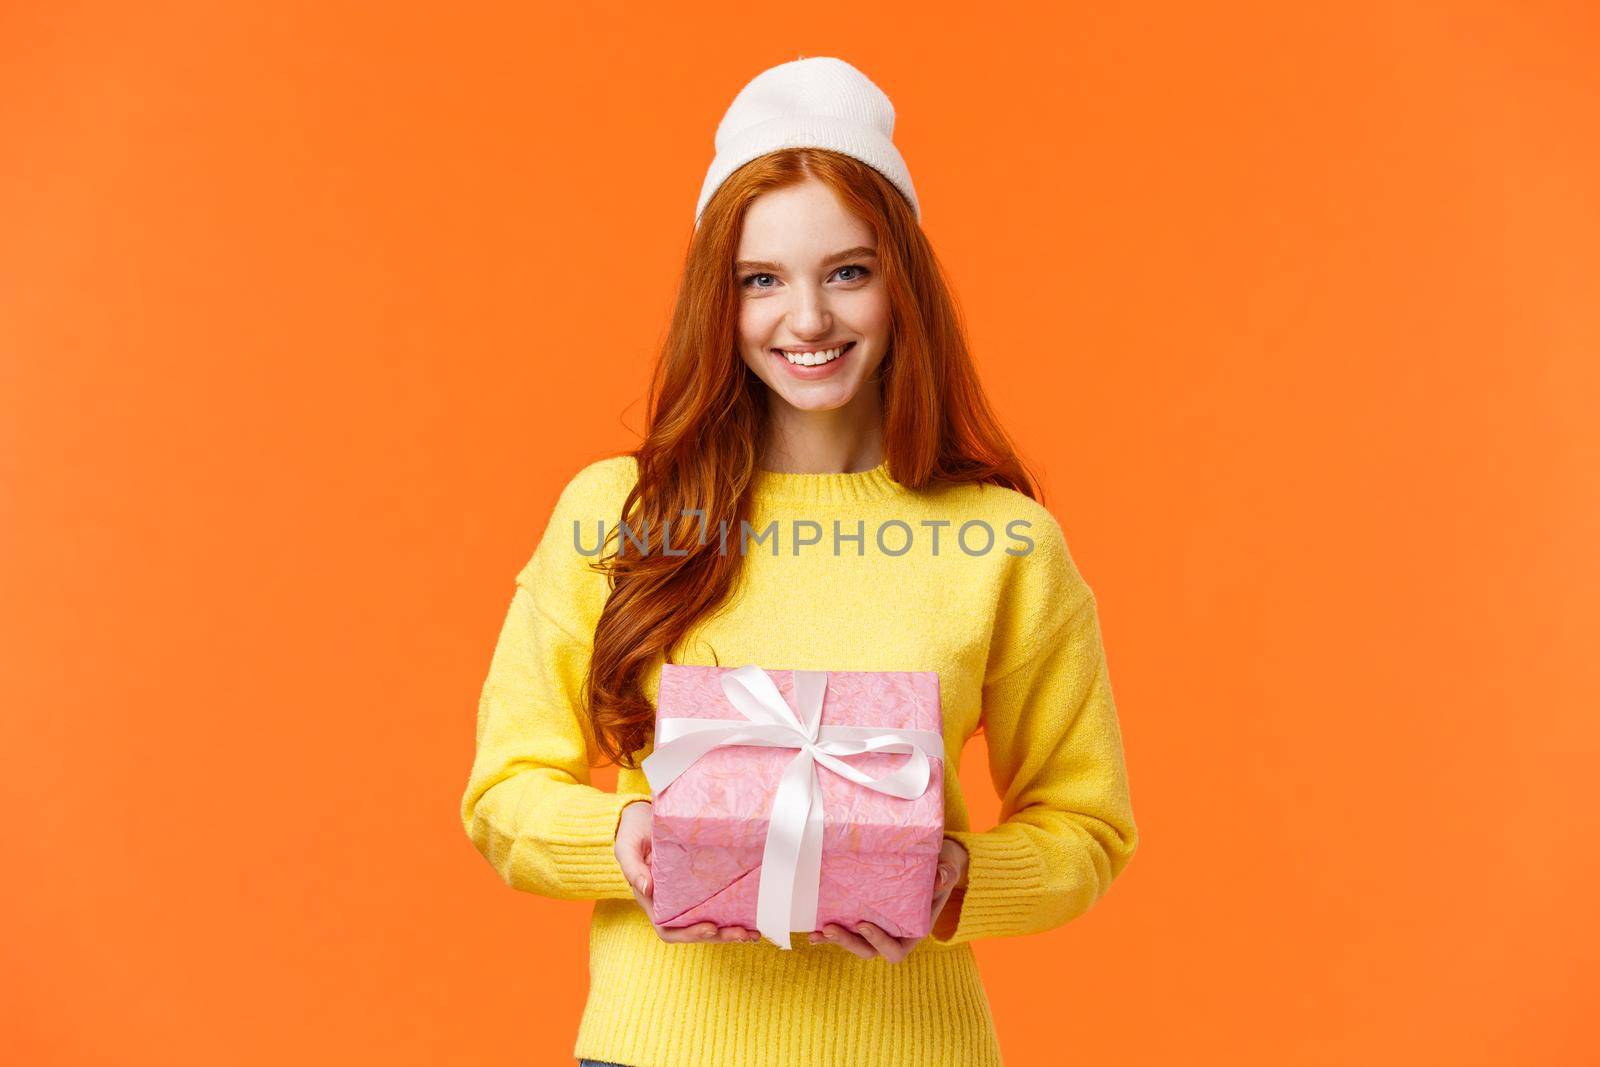 Cute redhead european woman prepare gift, wrapped present and giving it on christmas holidays, wearing winter beanie, smiling joyfully as congratulating someone, orange background.